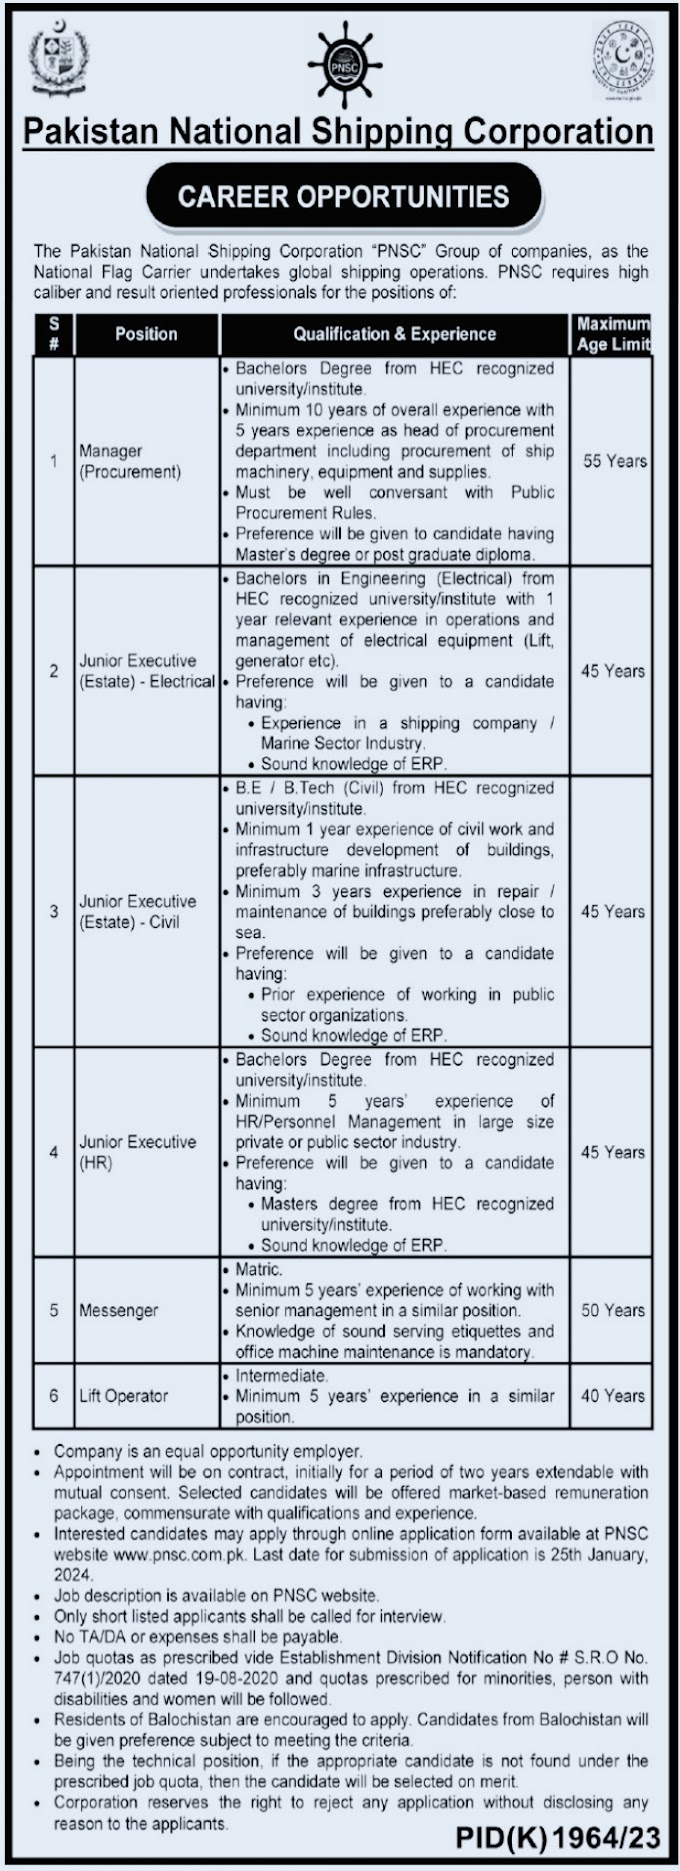 Pakistan National Shipping Corporation PNSC Jobs 2024, Today Latest Jobs apply Now!💥